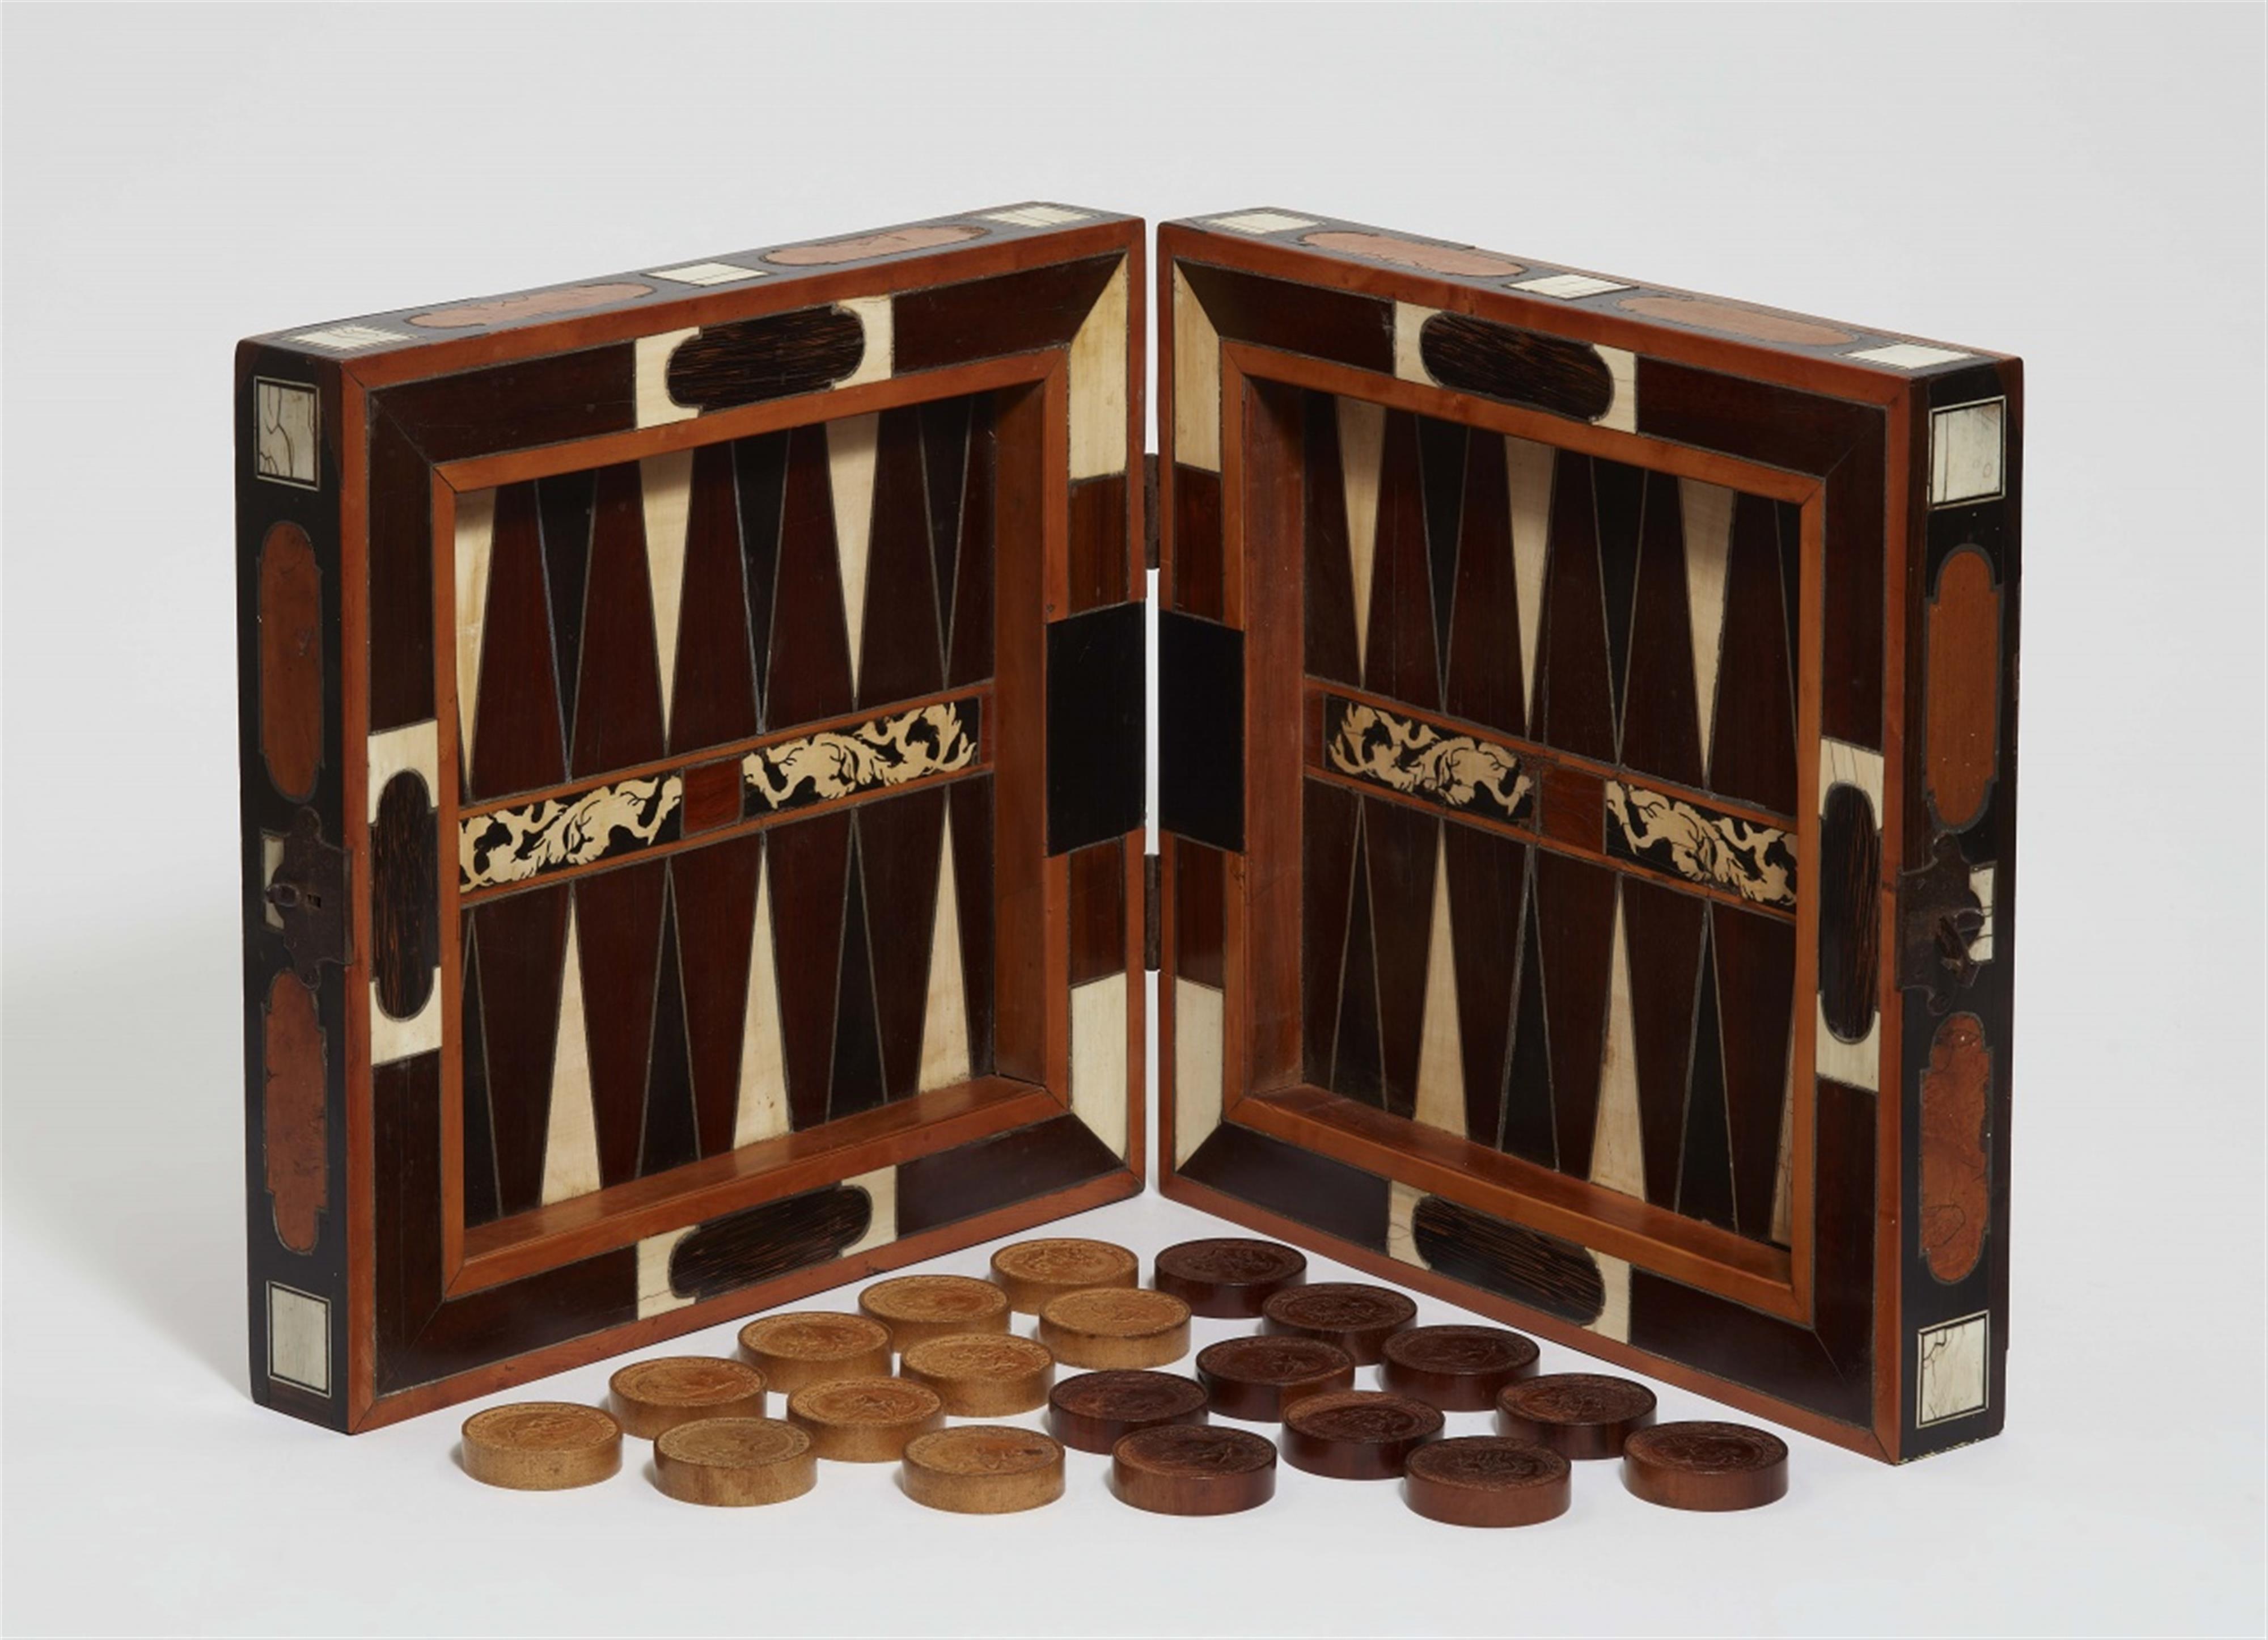 A Baroque gaming chest with 20 game pieces - image-1